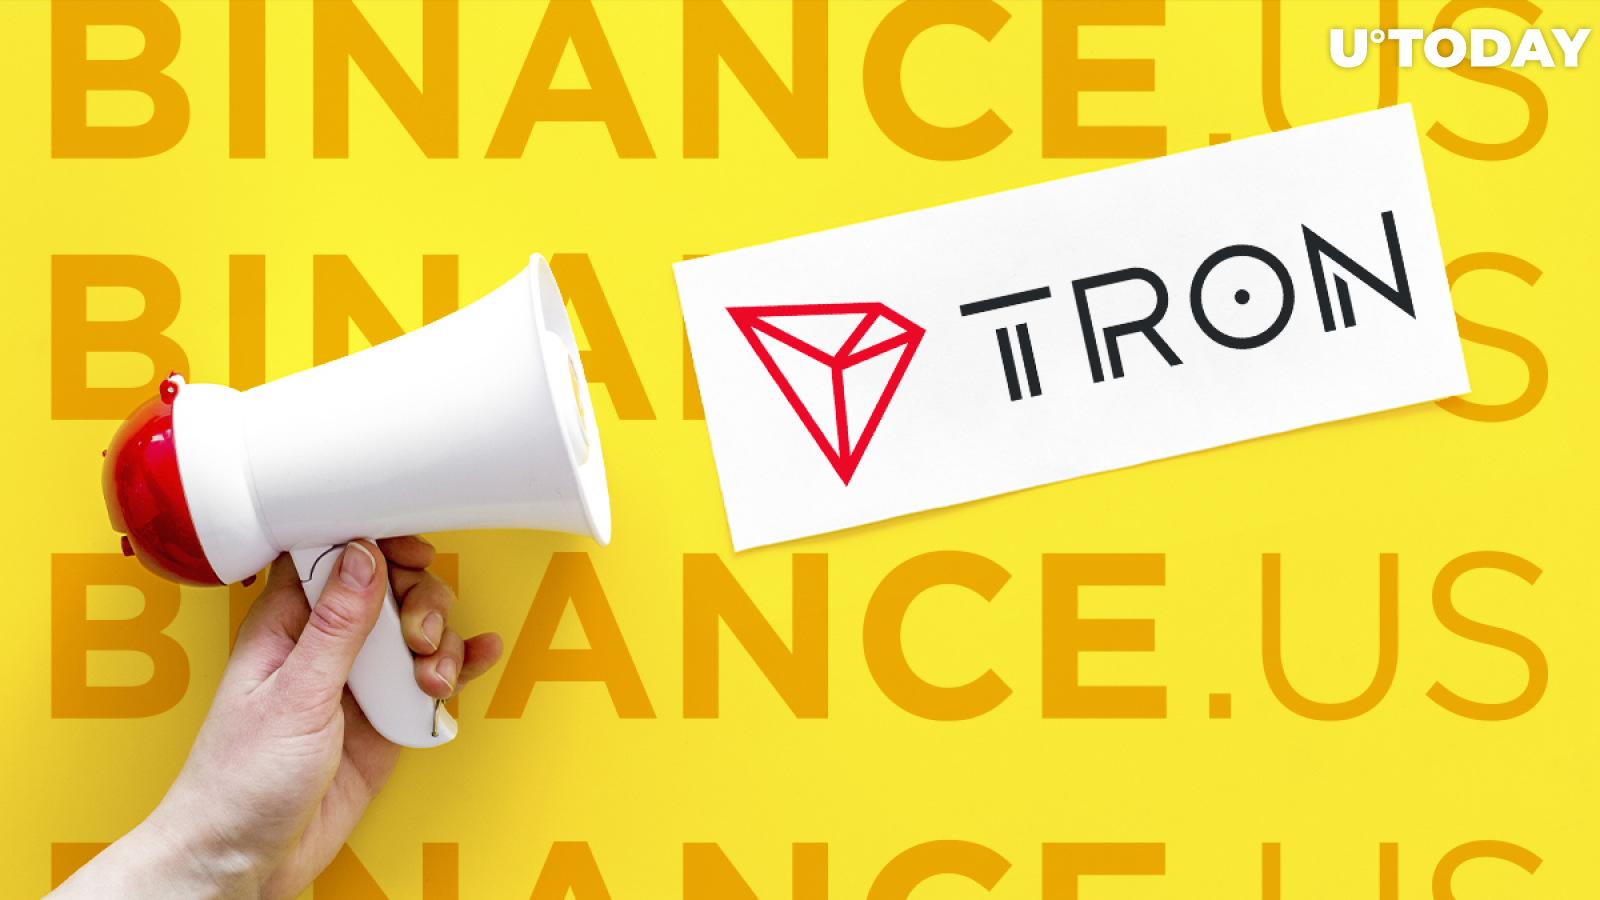 Tron to Be Listed on Binance.US, Poloniex Offers Holders New Ways to Earn TRX